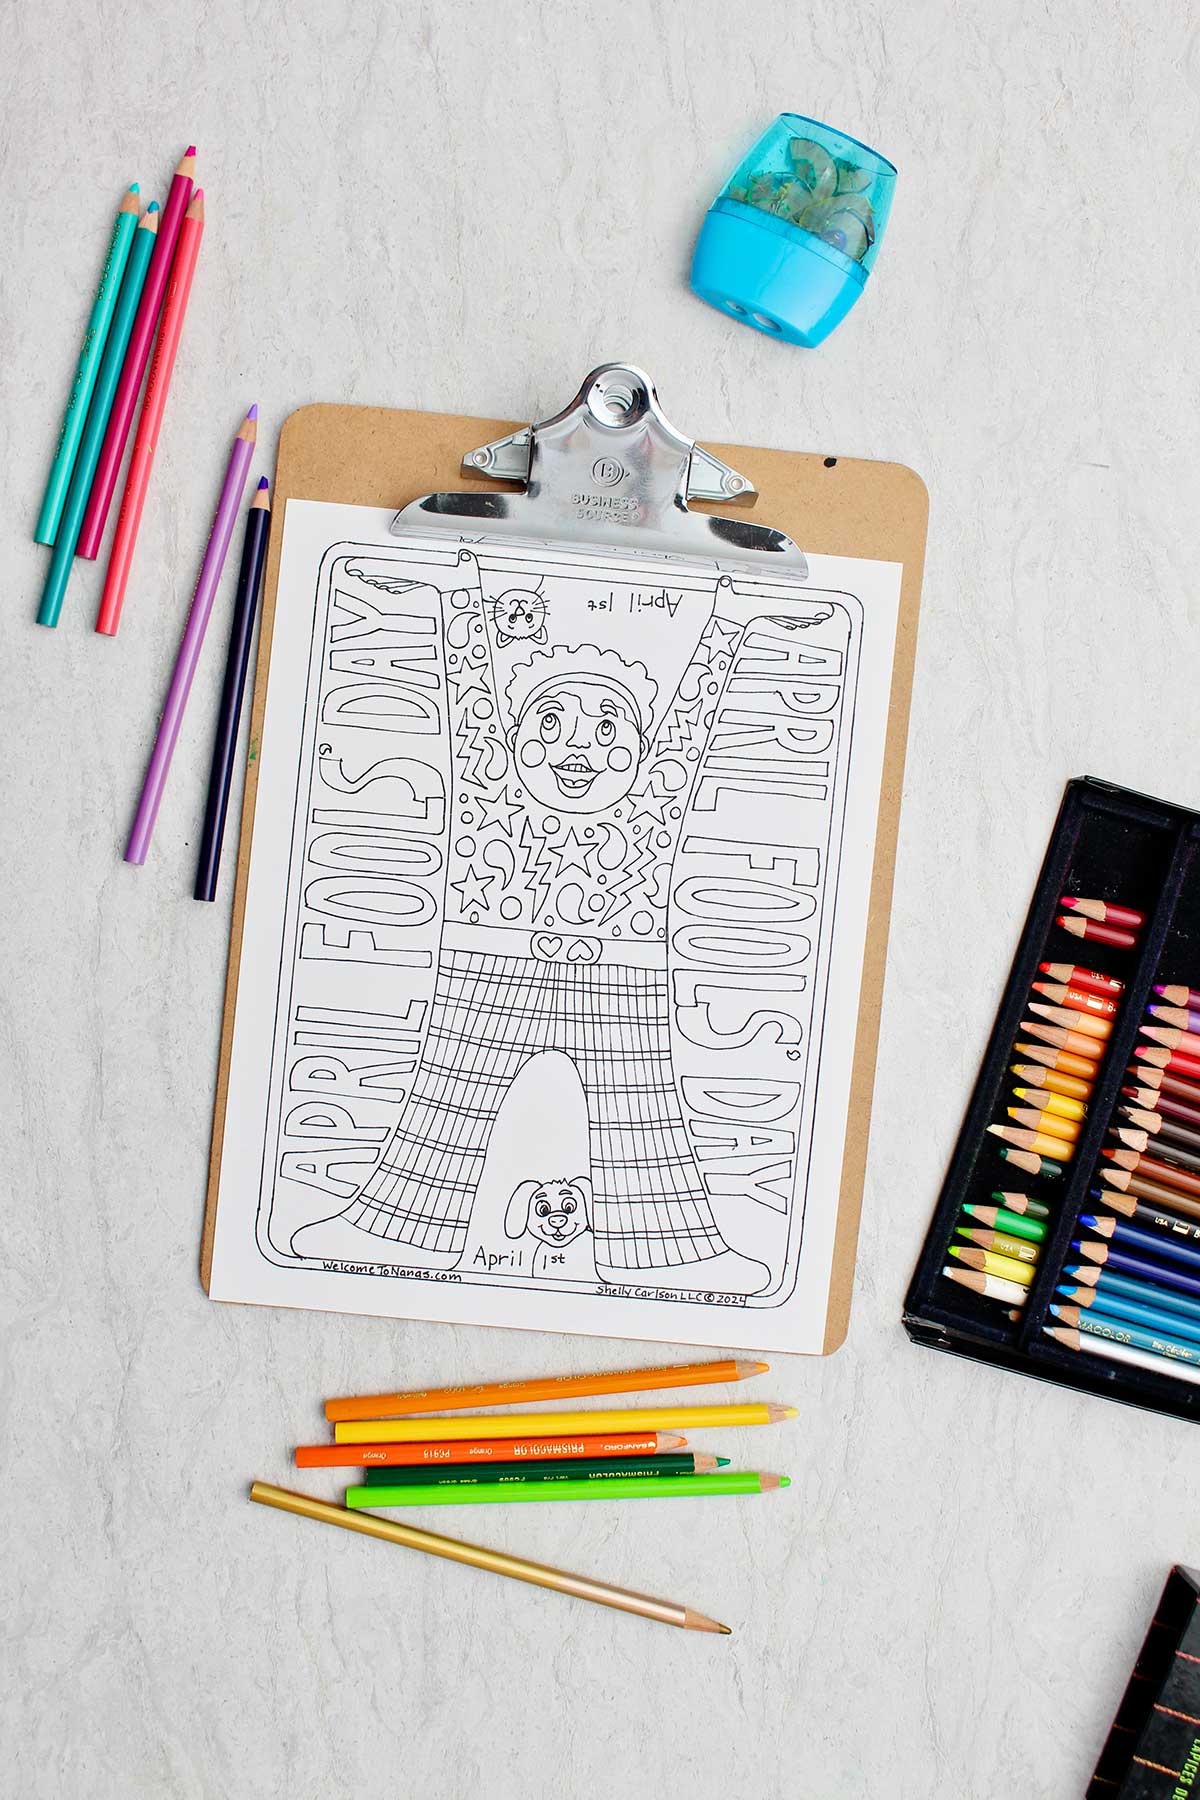 April Fools Day Coloring Page on clip board with colored pencils around.